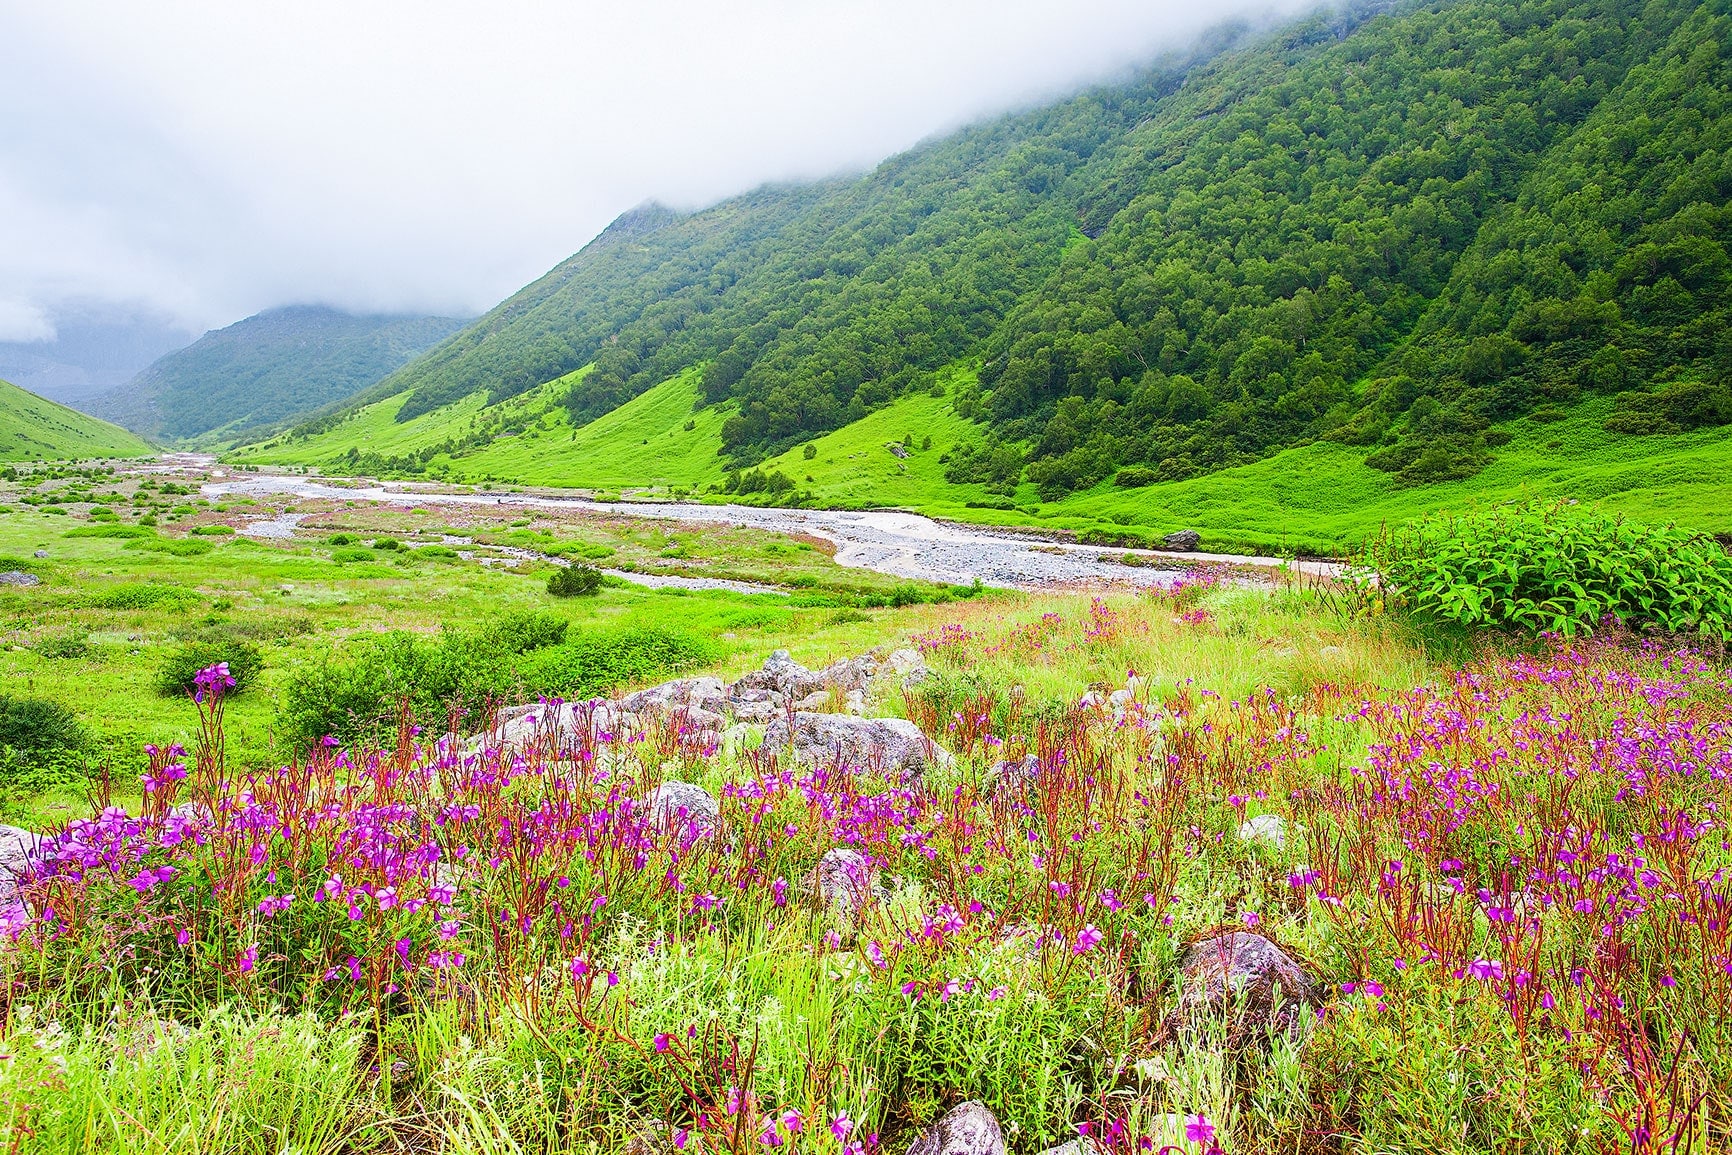 Valley of flowers - one of the best places to visit alone in North India